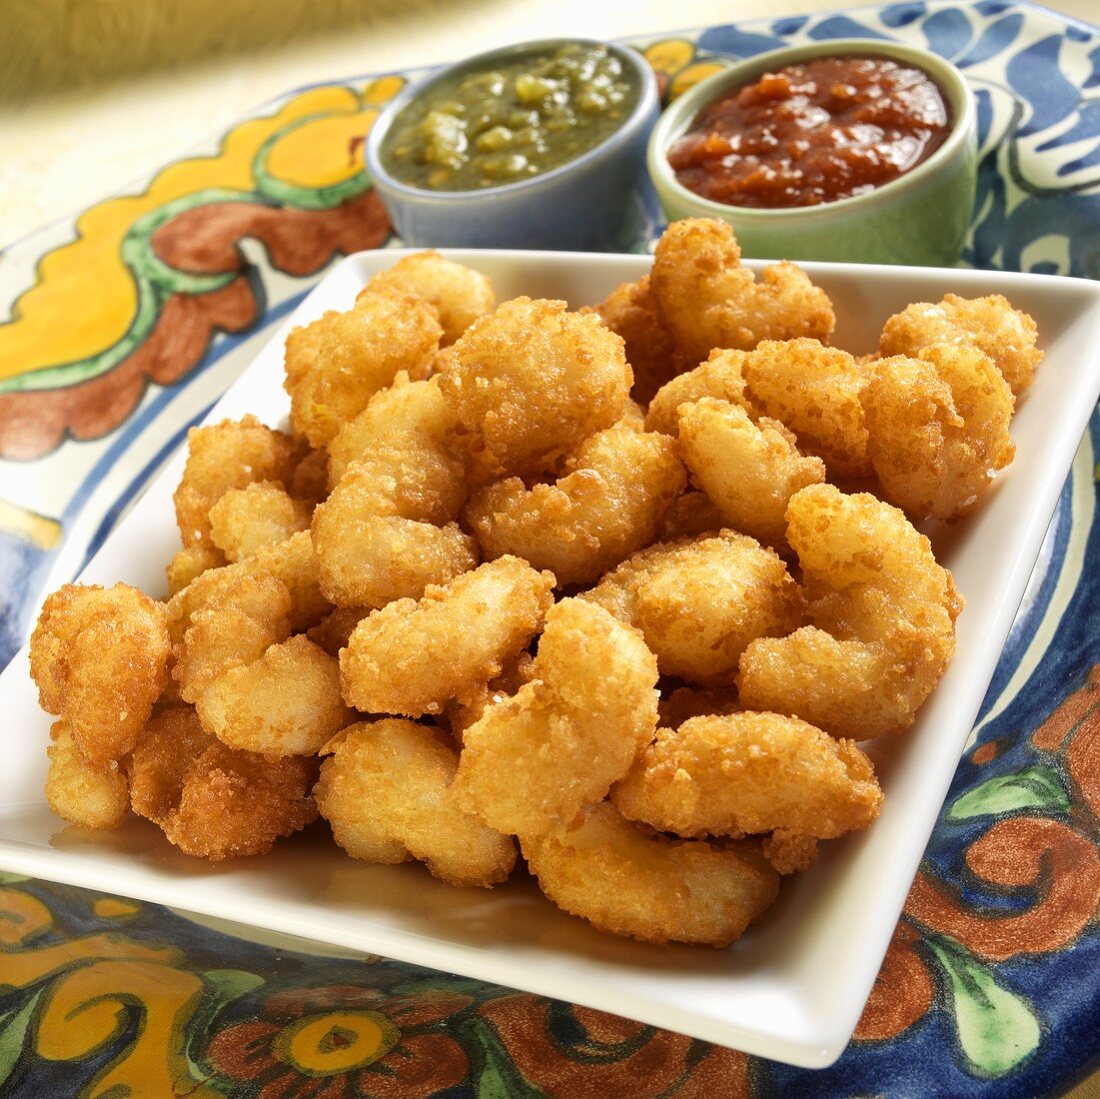 Fried Breaded Shrimp with Chili Sauce and Tomatillo Salsa